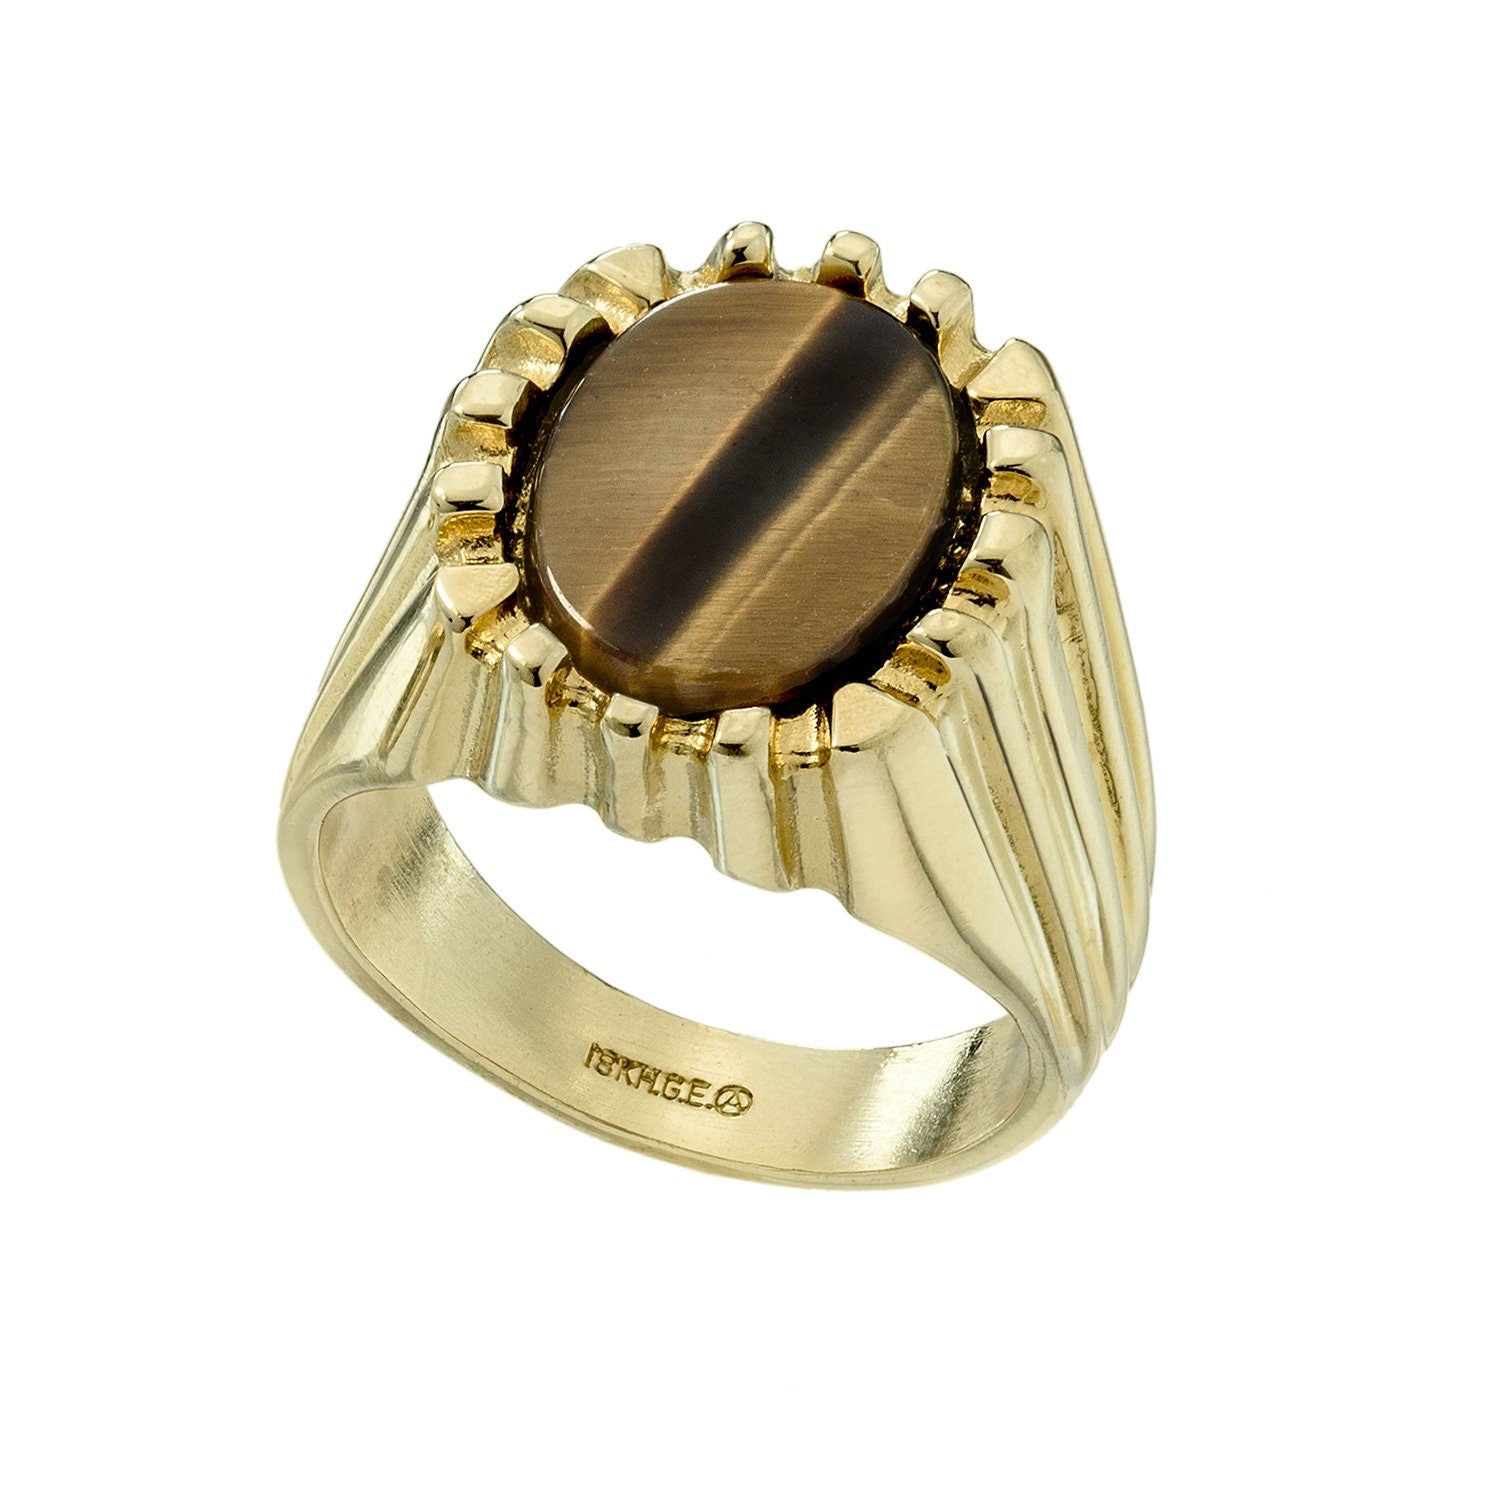 Vintage Ring 1980s Mens Genuine Tiger Eye 18kt Gold Plated Ring Unisex Jewelry #R1960 - Limited Stock - Never Worn